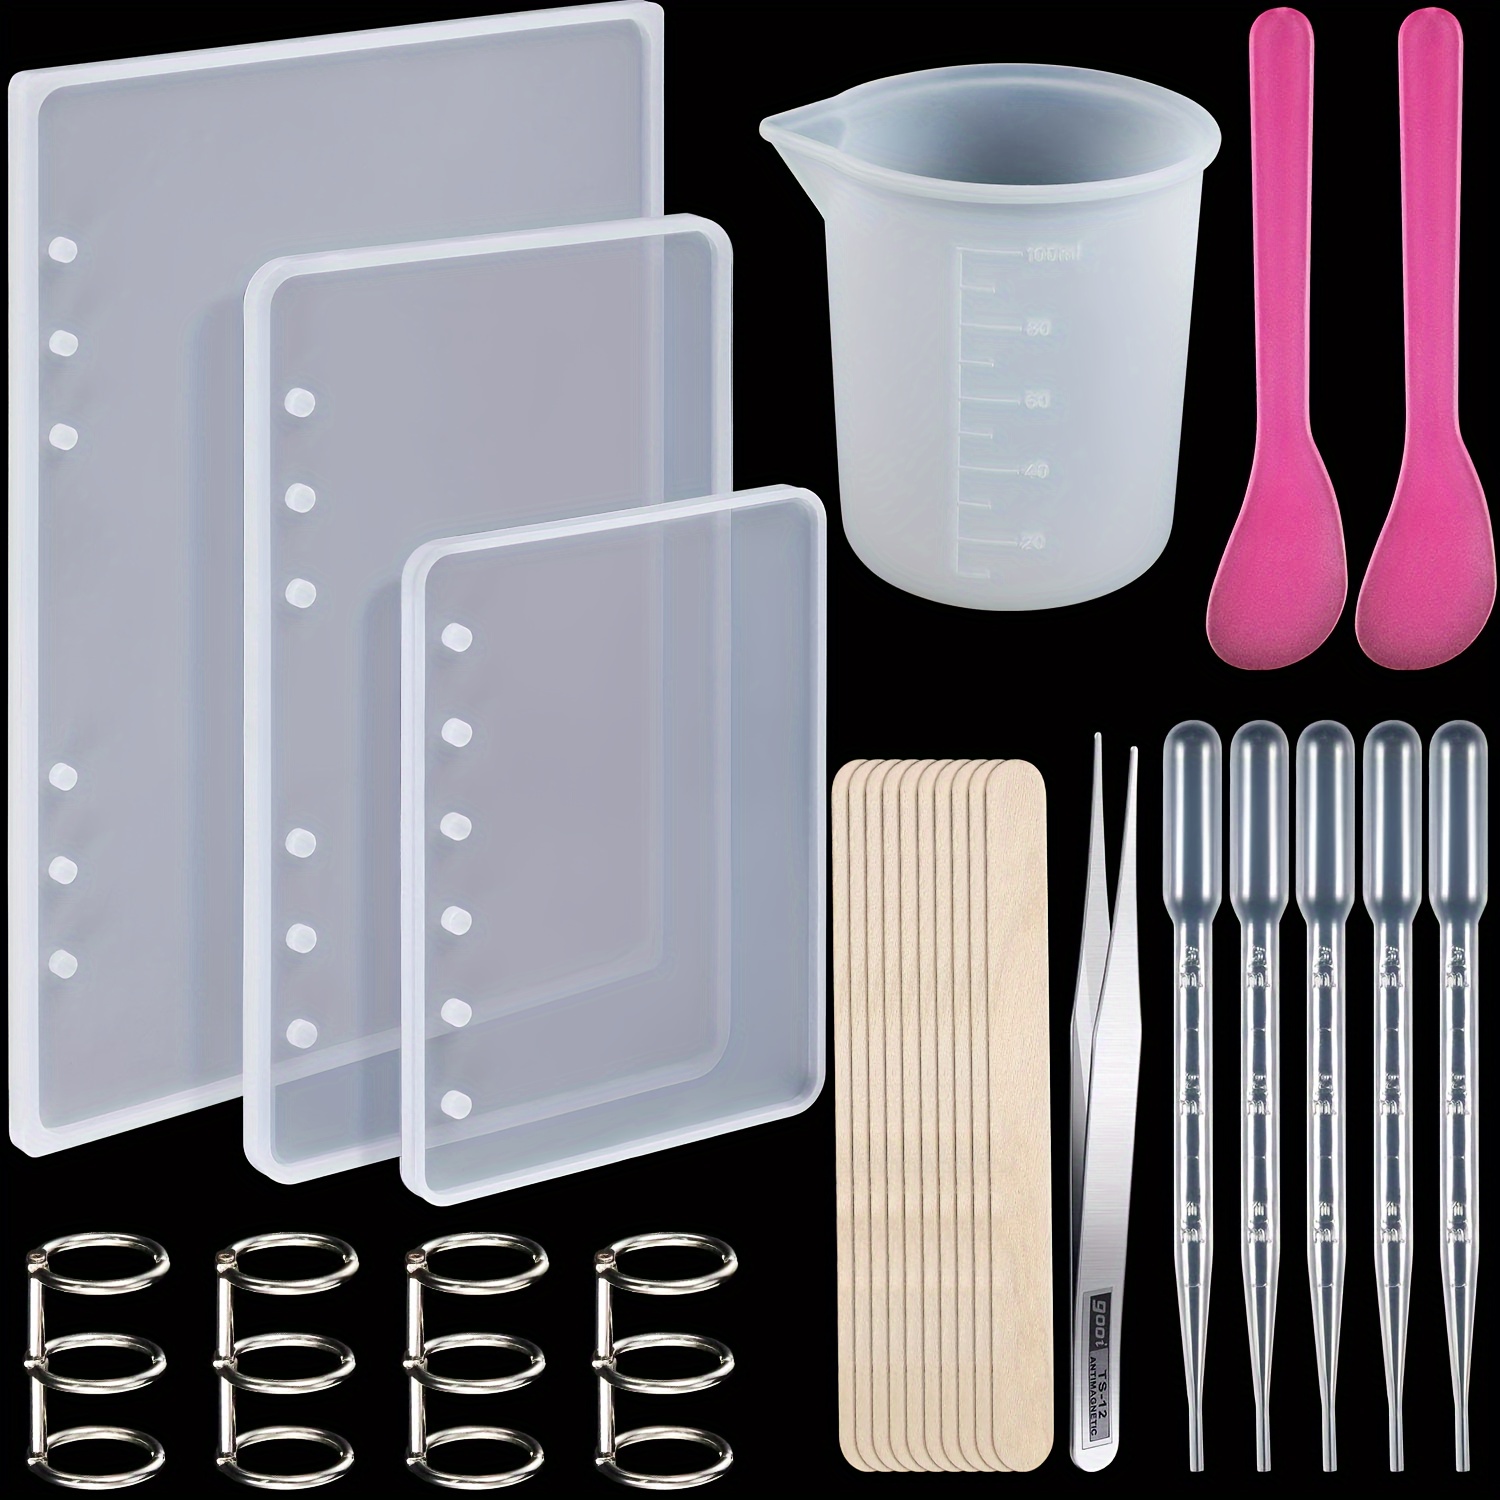 

26-piece Silicone Mold Kit For Notebook Covers - Diy Epoxy Resin Casting Set With Book Rings, Spoon, Tweezers, Cups & Stir Sticks - Perfect For A5 A6 A7 Journals